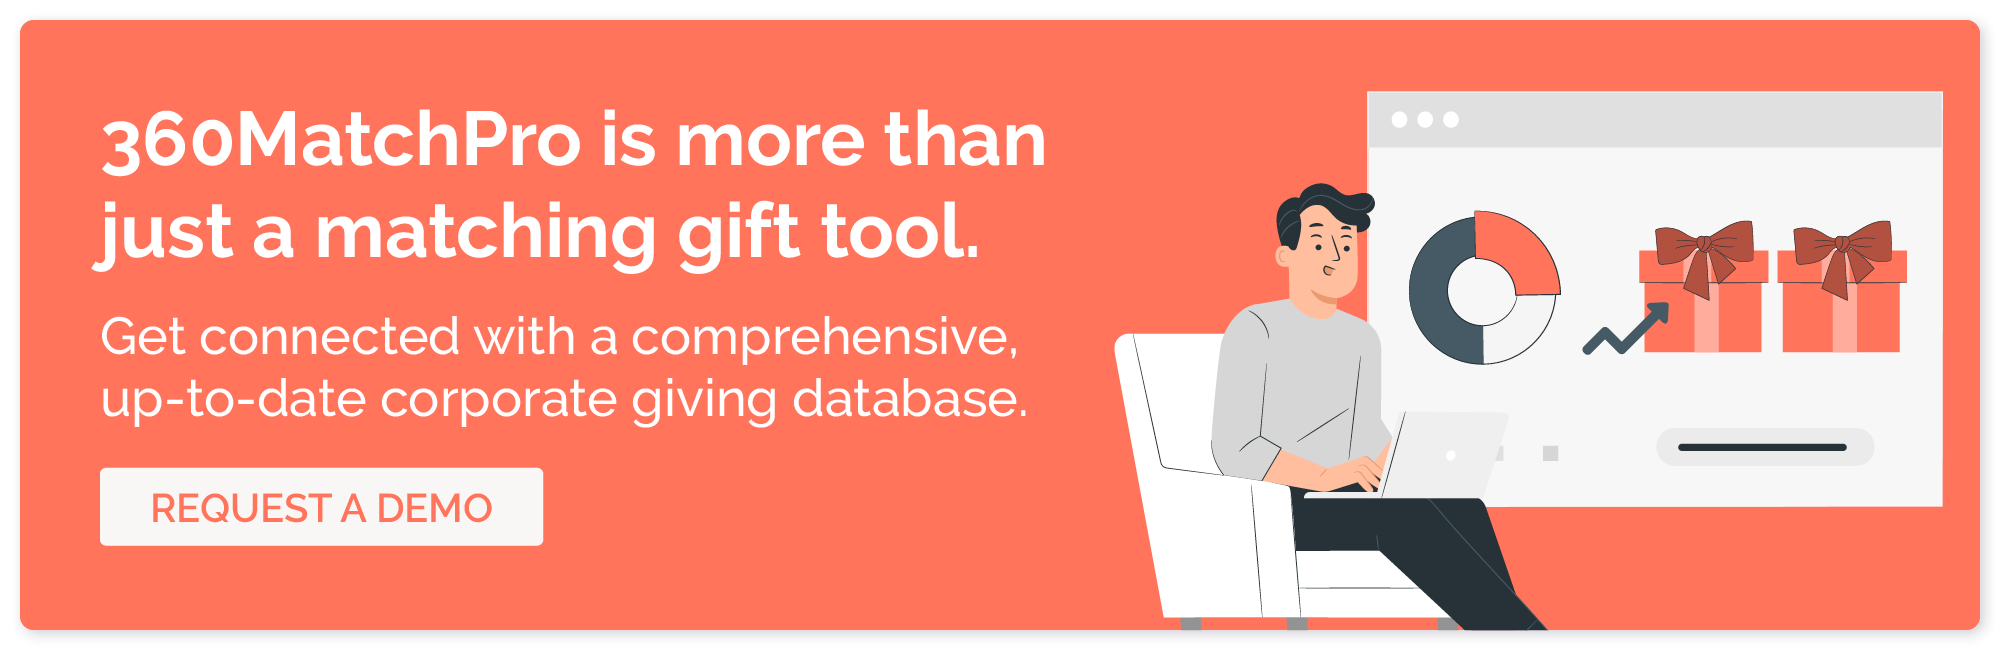 360MatchPro is more than just a matching gift tool. Get connected with a comprehensive, up-to-date corporate giving database.